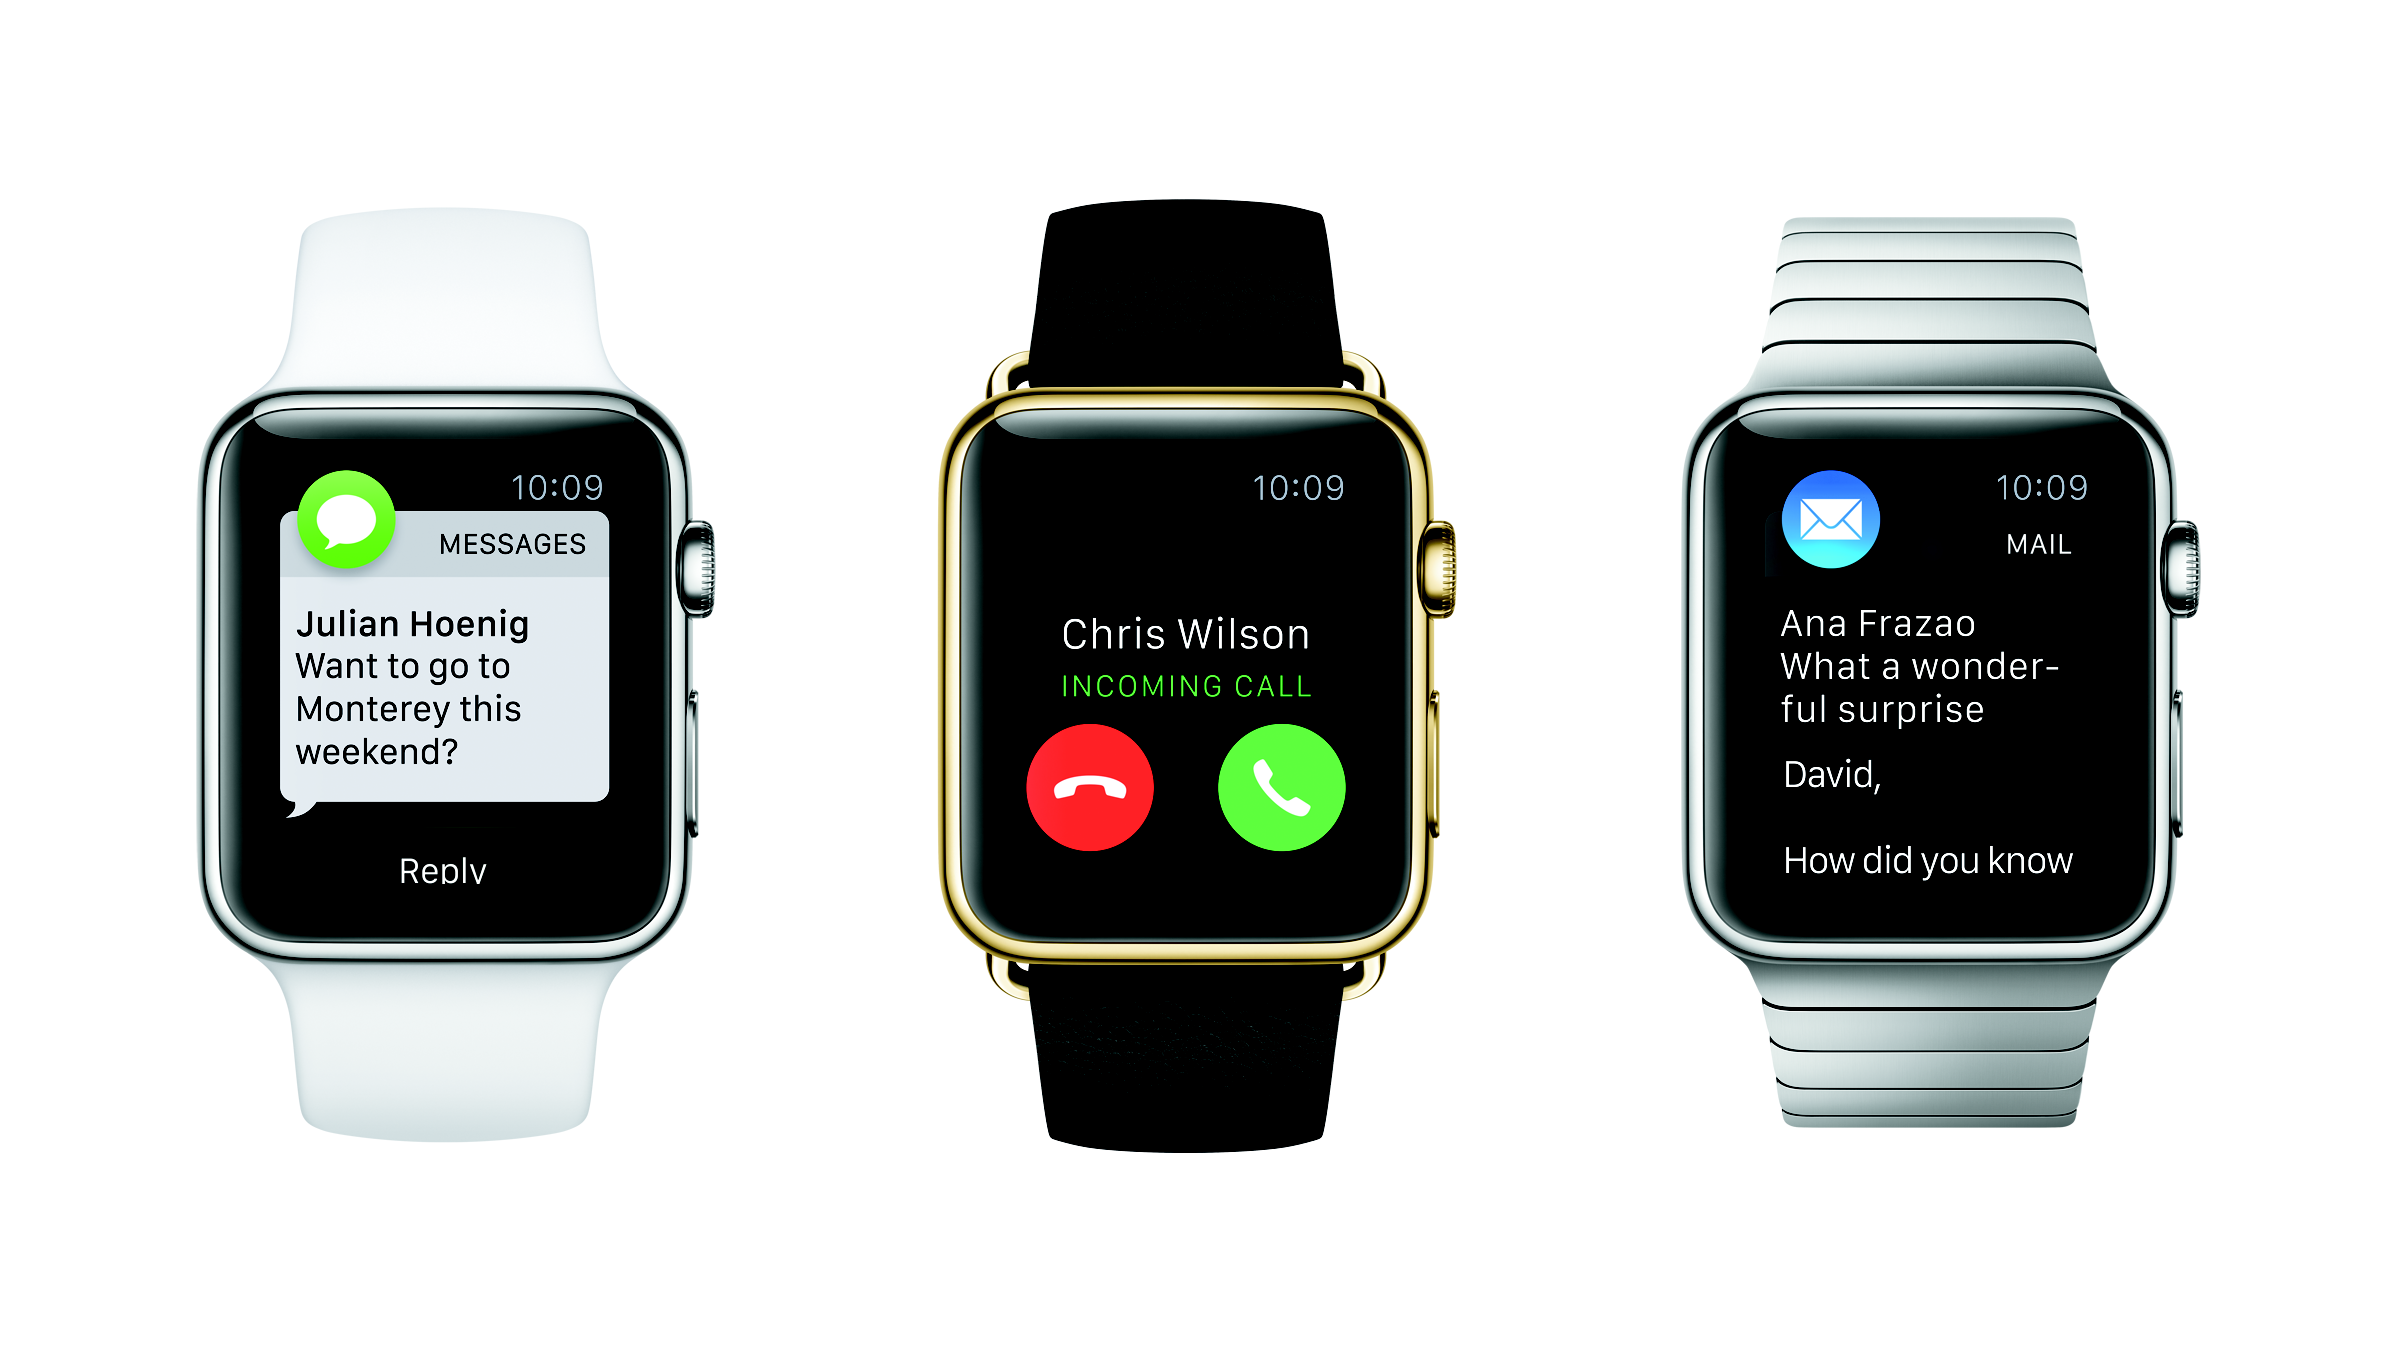 Figure 1: The three Apple Watch models from left to right: Apple Watch Sport, Apple Watch Edition, and Apple Watch